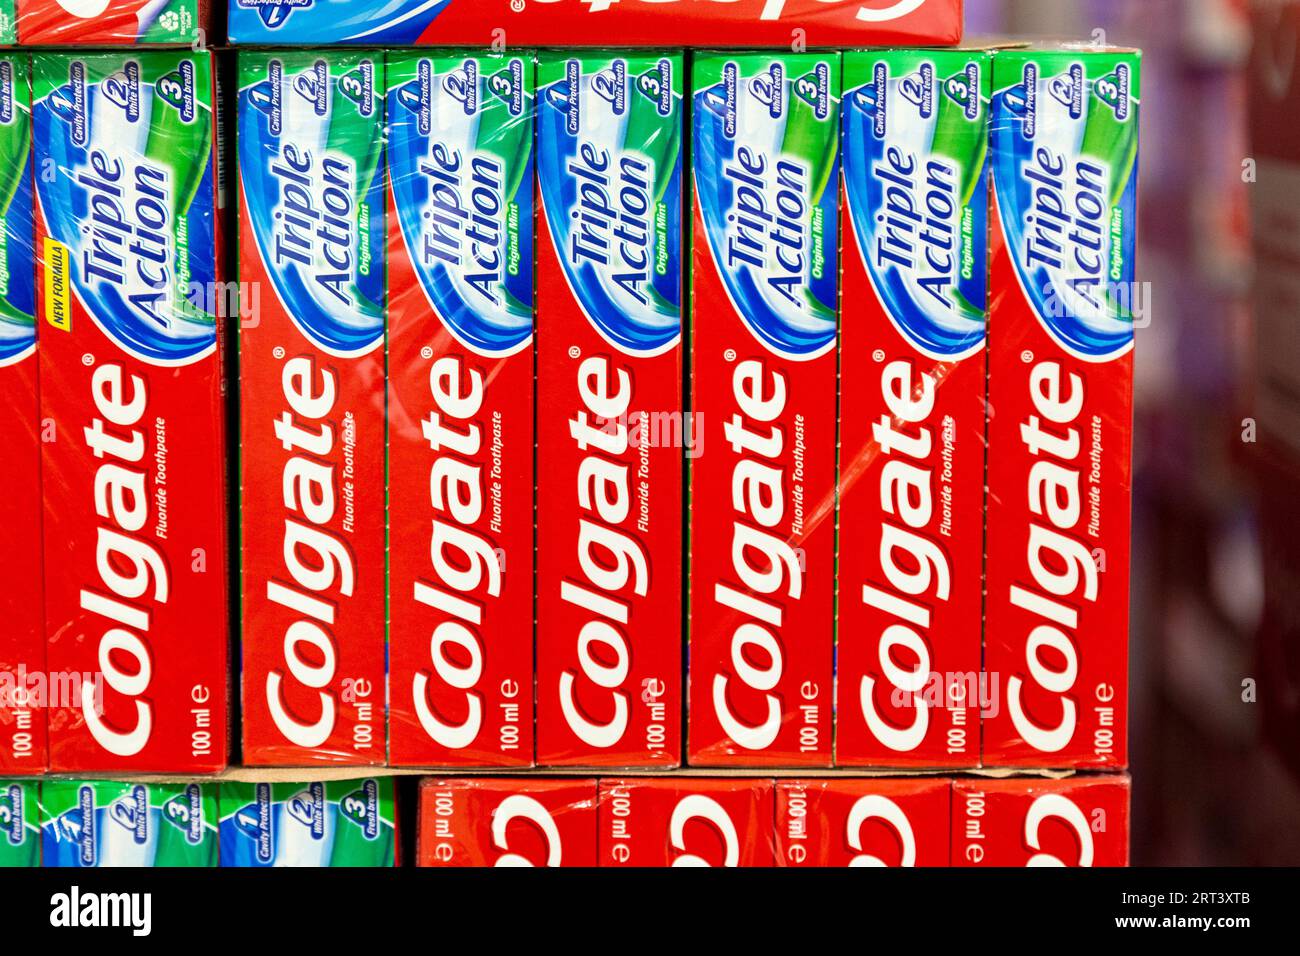 Bulk packages of Colgate Triple Action toothpaste at Costco Stock Photo